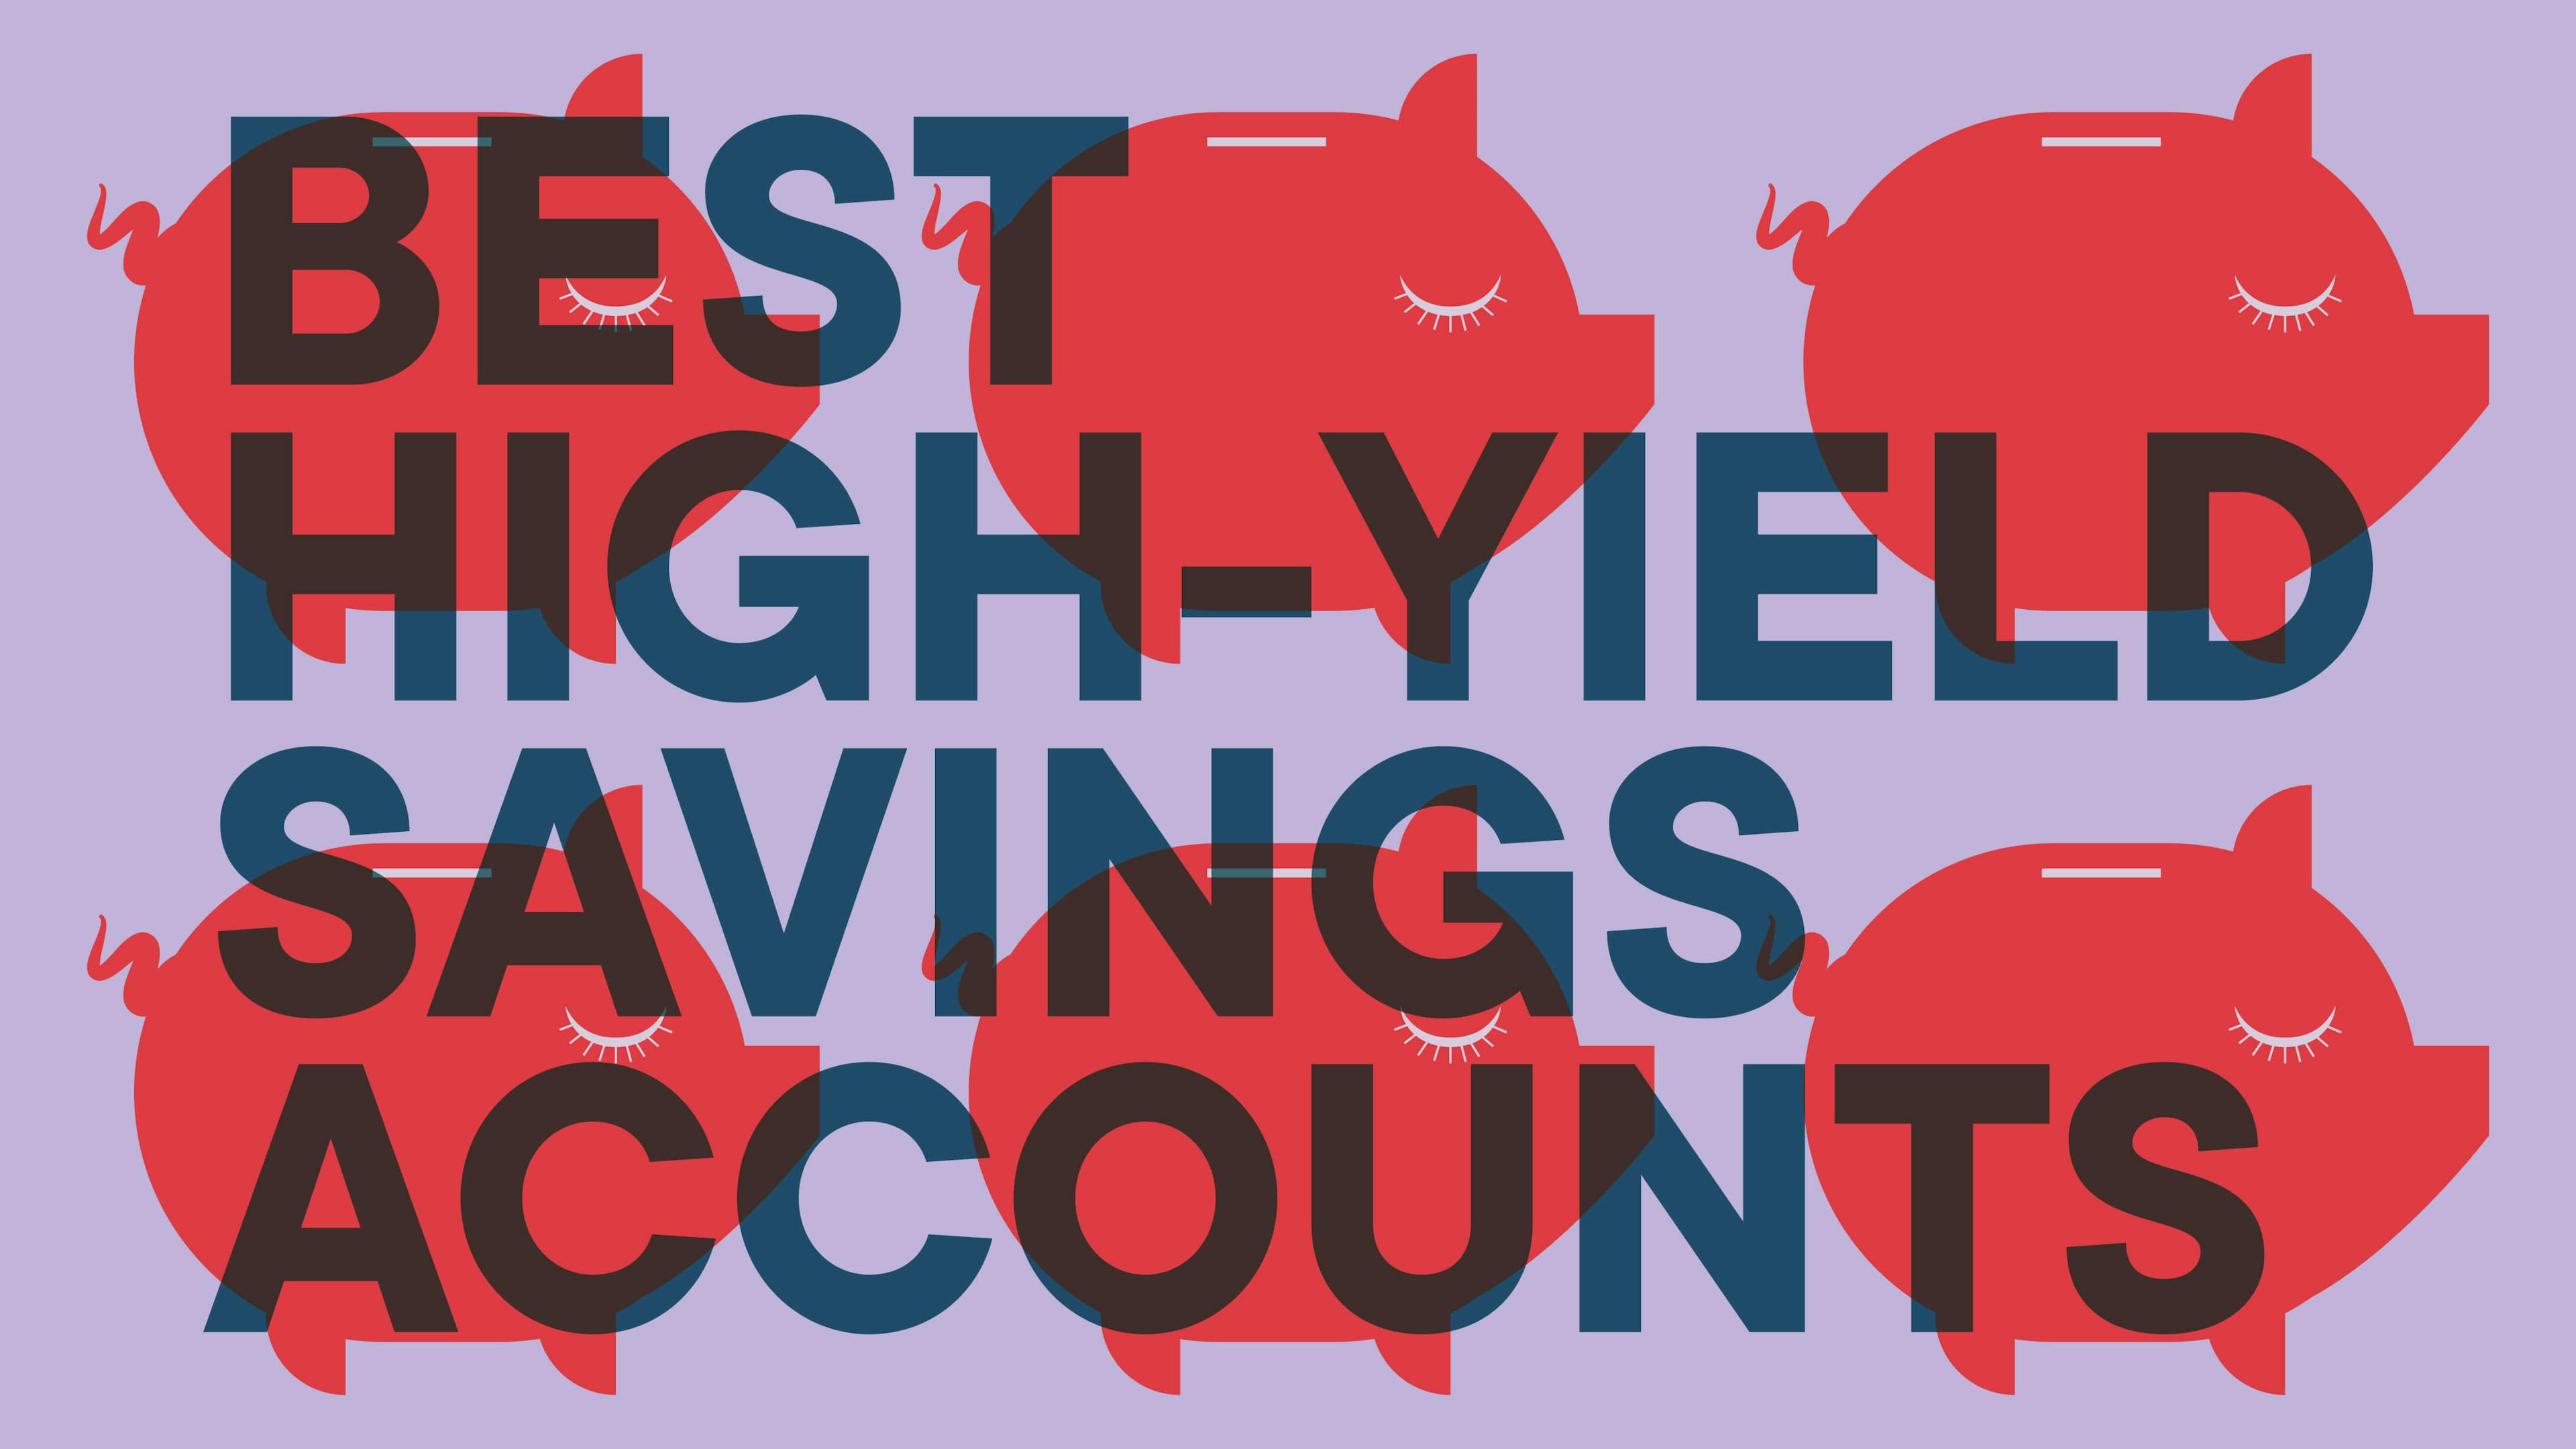 Best Savings Account With High Yield